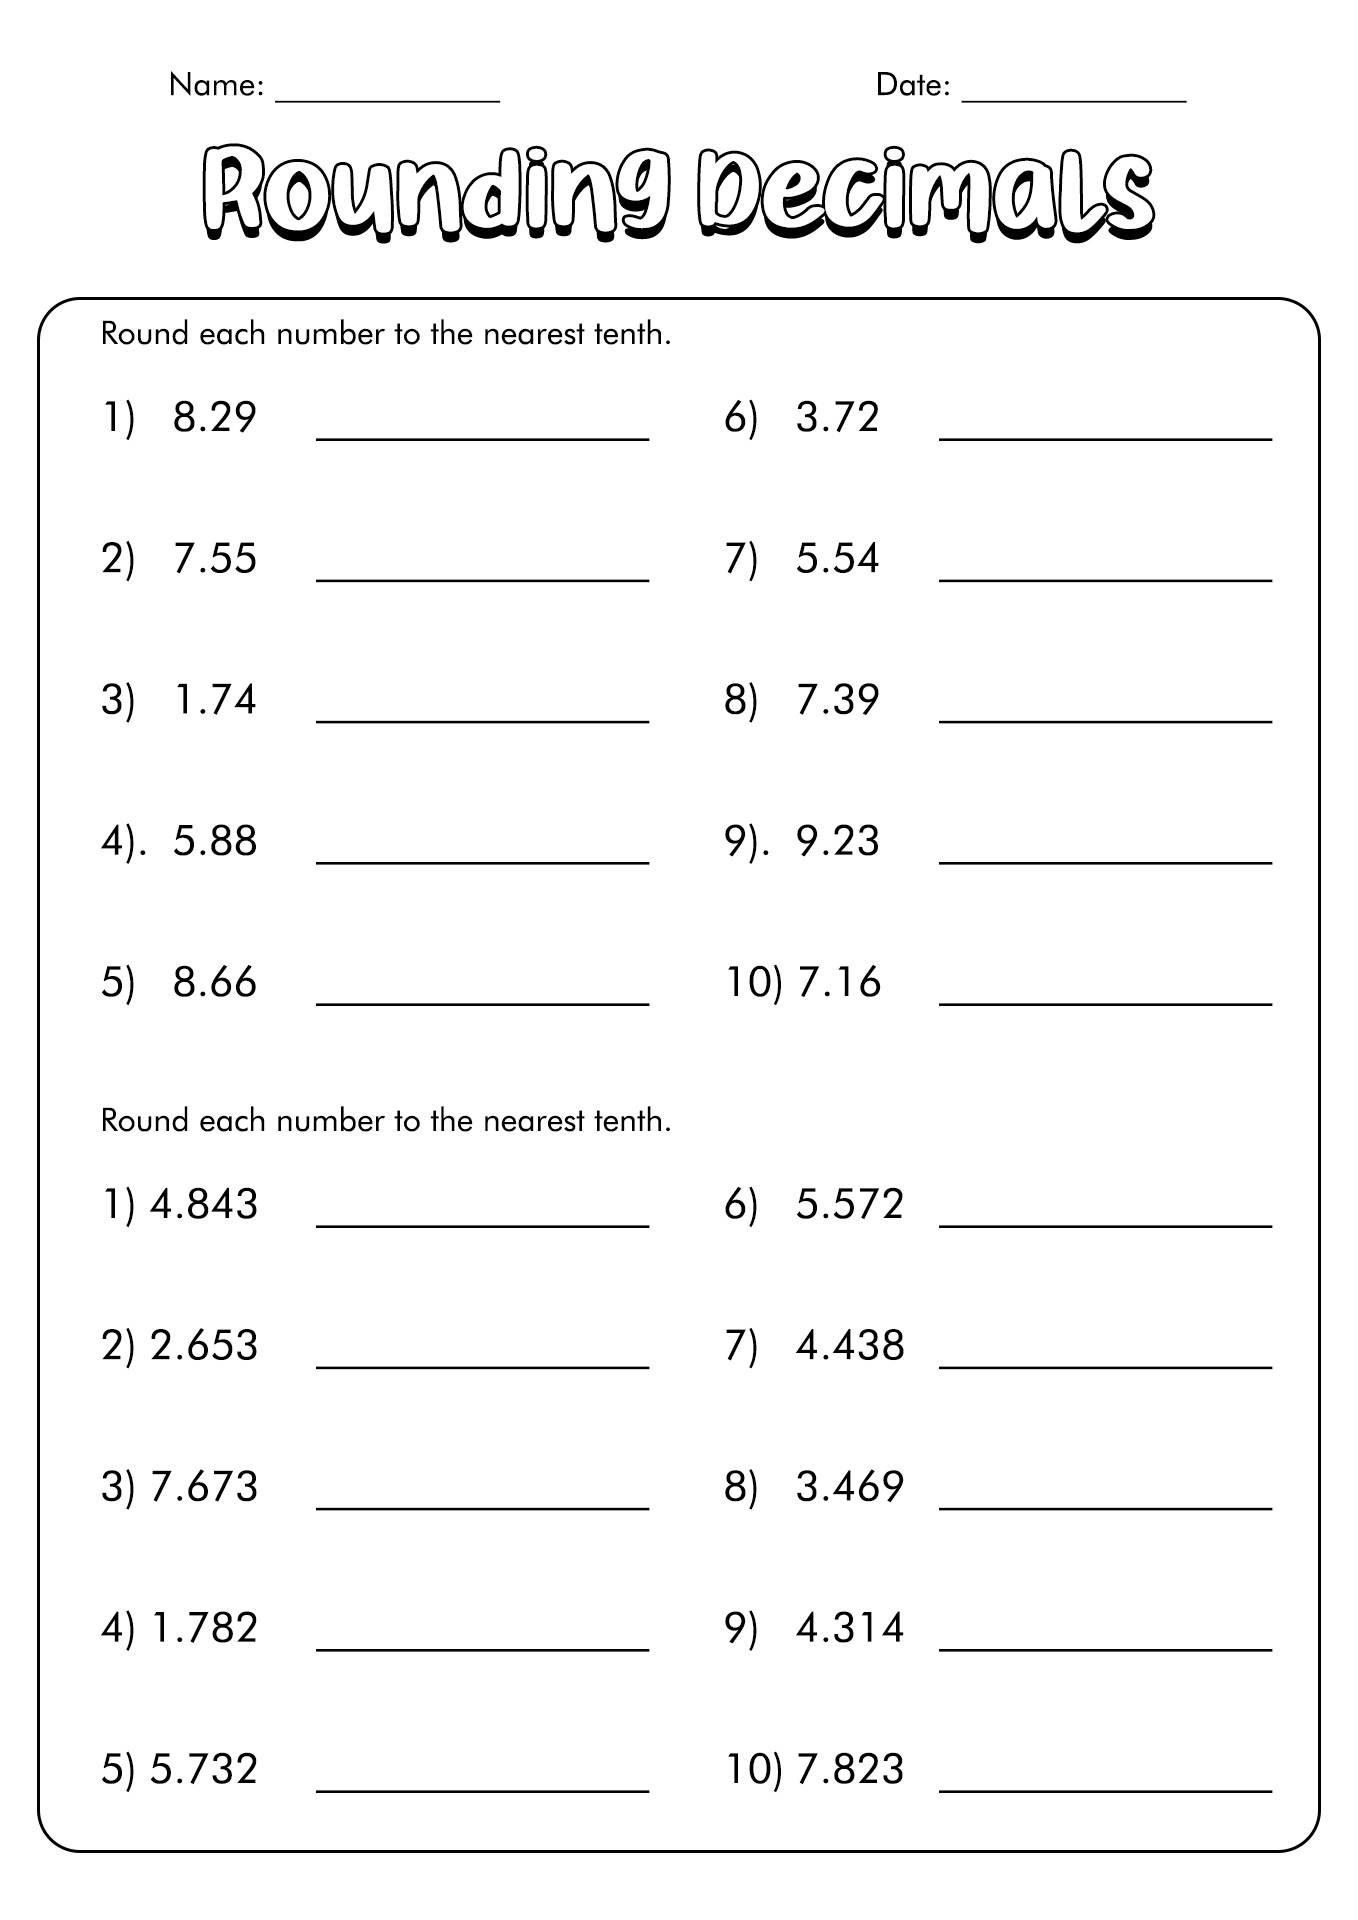 printable-blank-number-line-templates-for-math-students-and-teachers